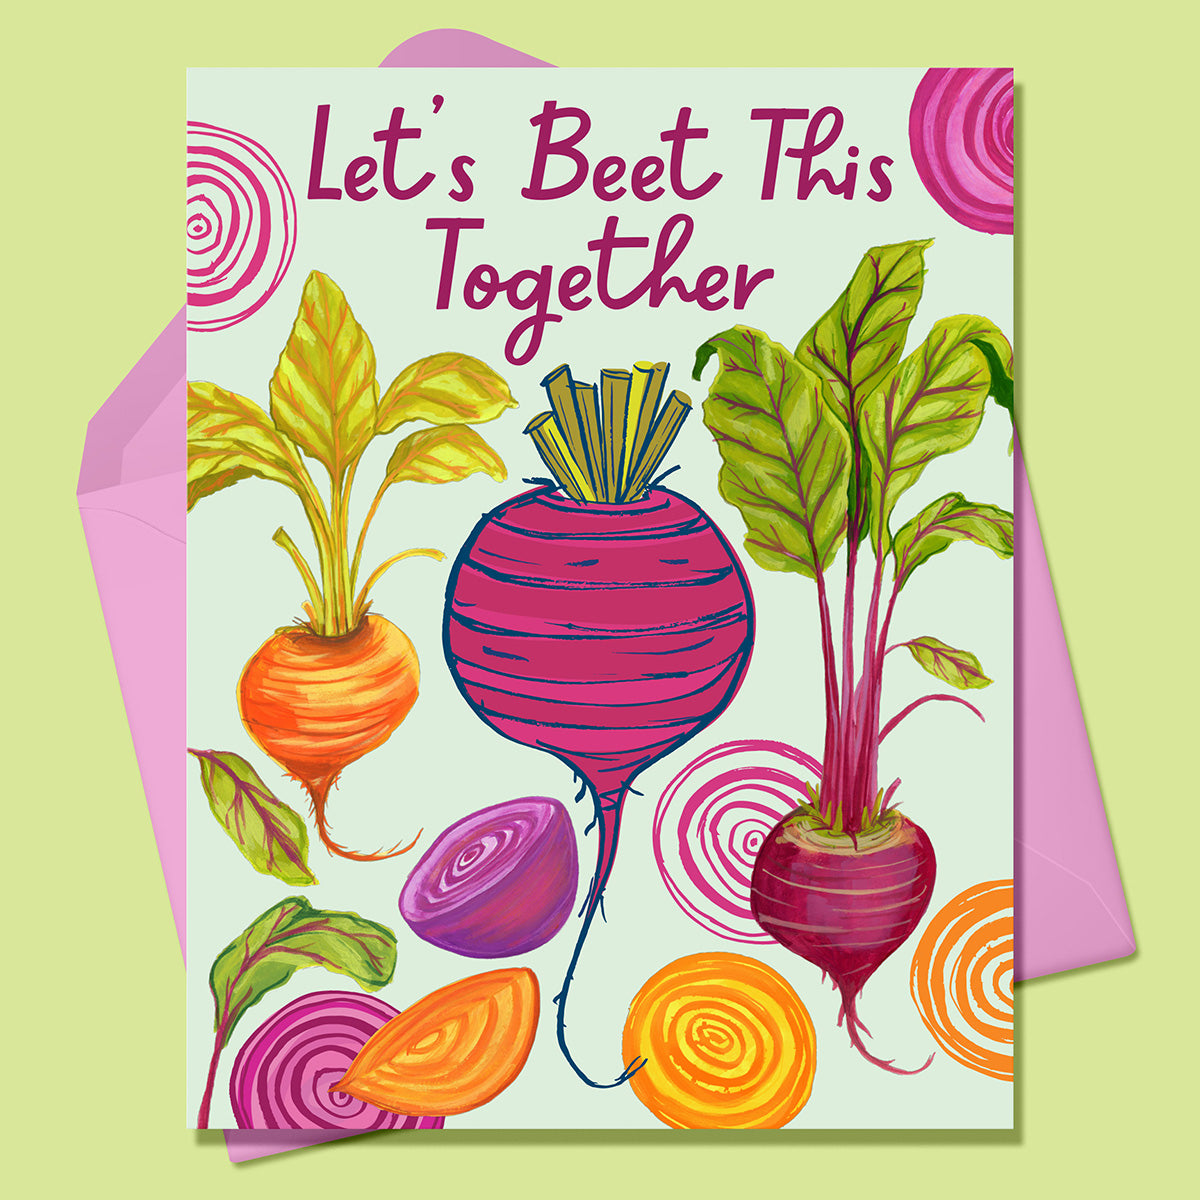 Paper Greeting card with the image of brightly colored beets in orange, pink, purple, on a mint background. Text says Let&#39;s Beet This Together. With a pink envelope. On a lime green background.